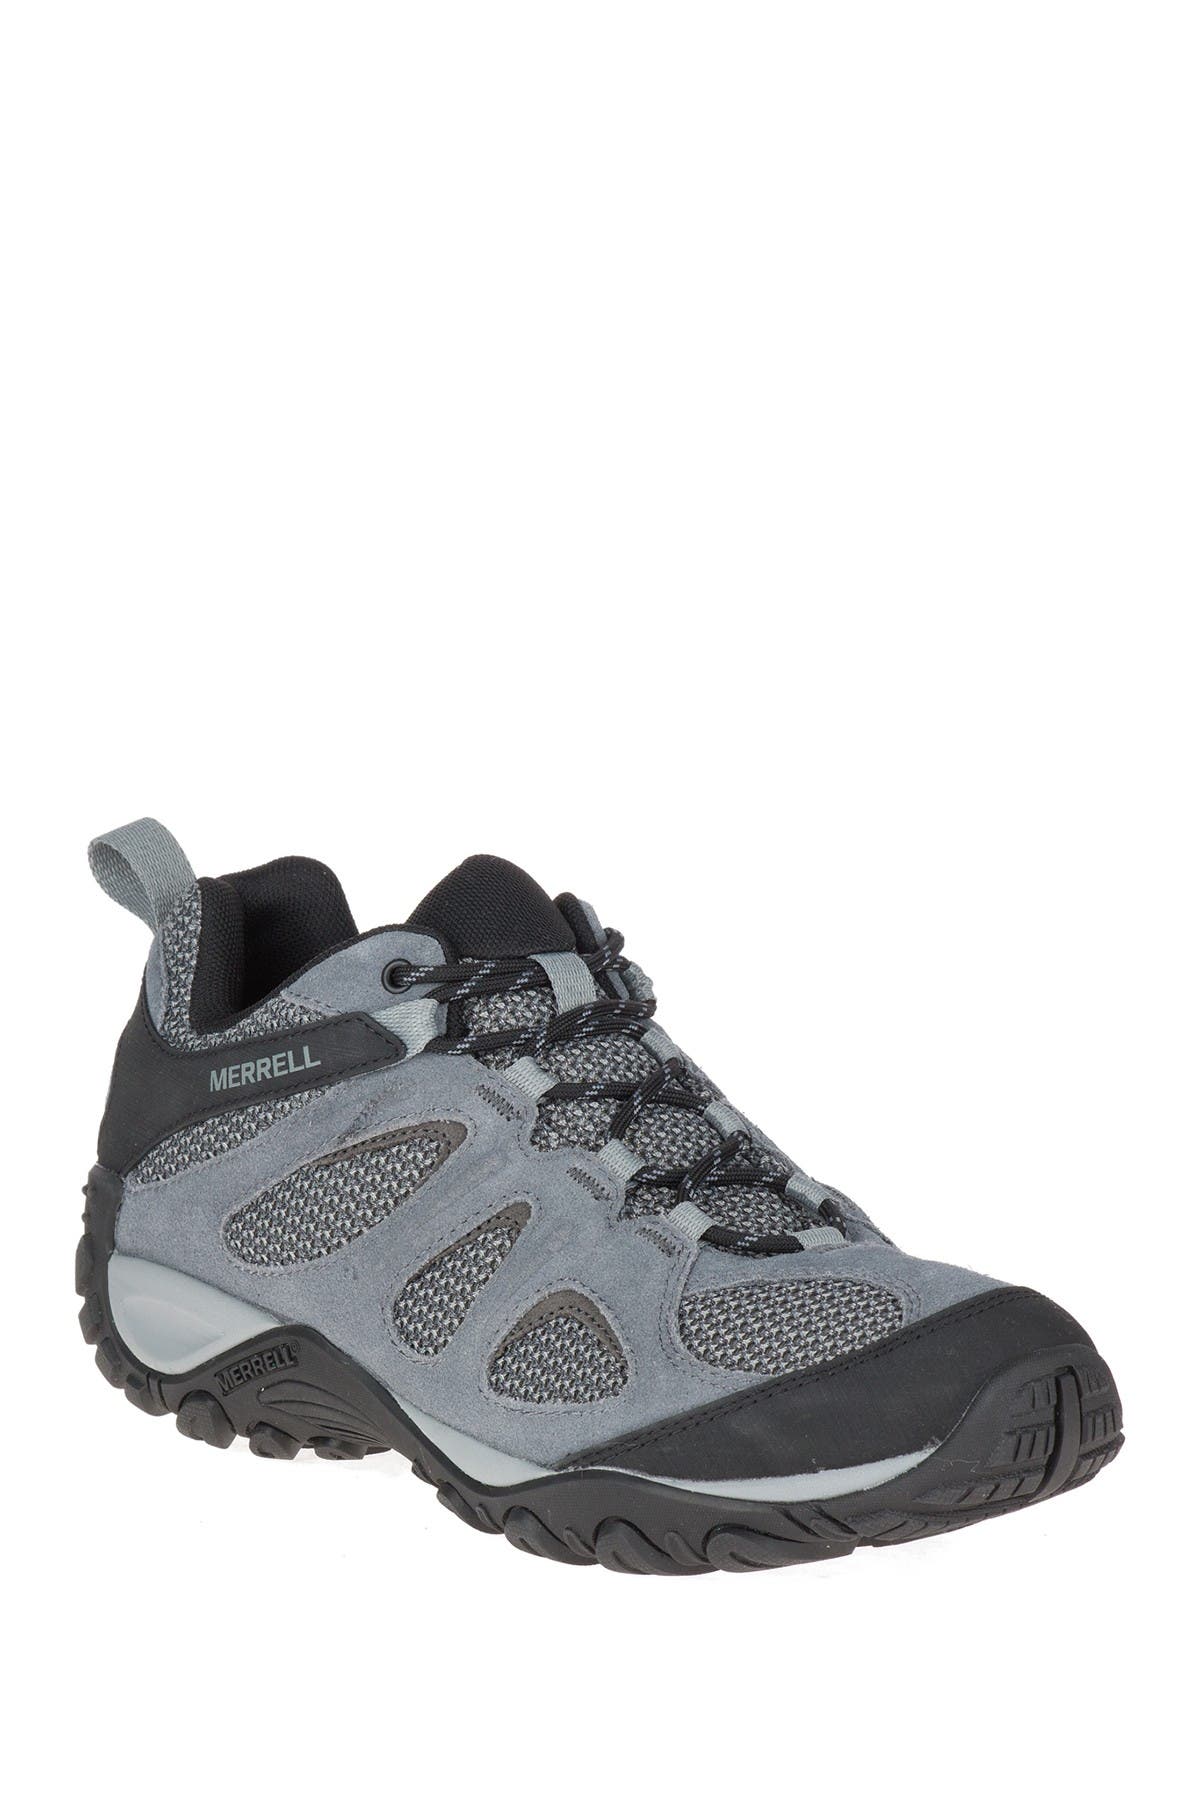 merrell hiking shoes clearance